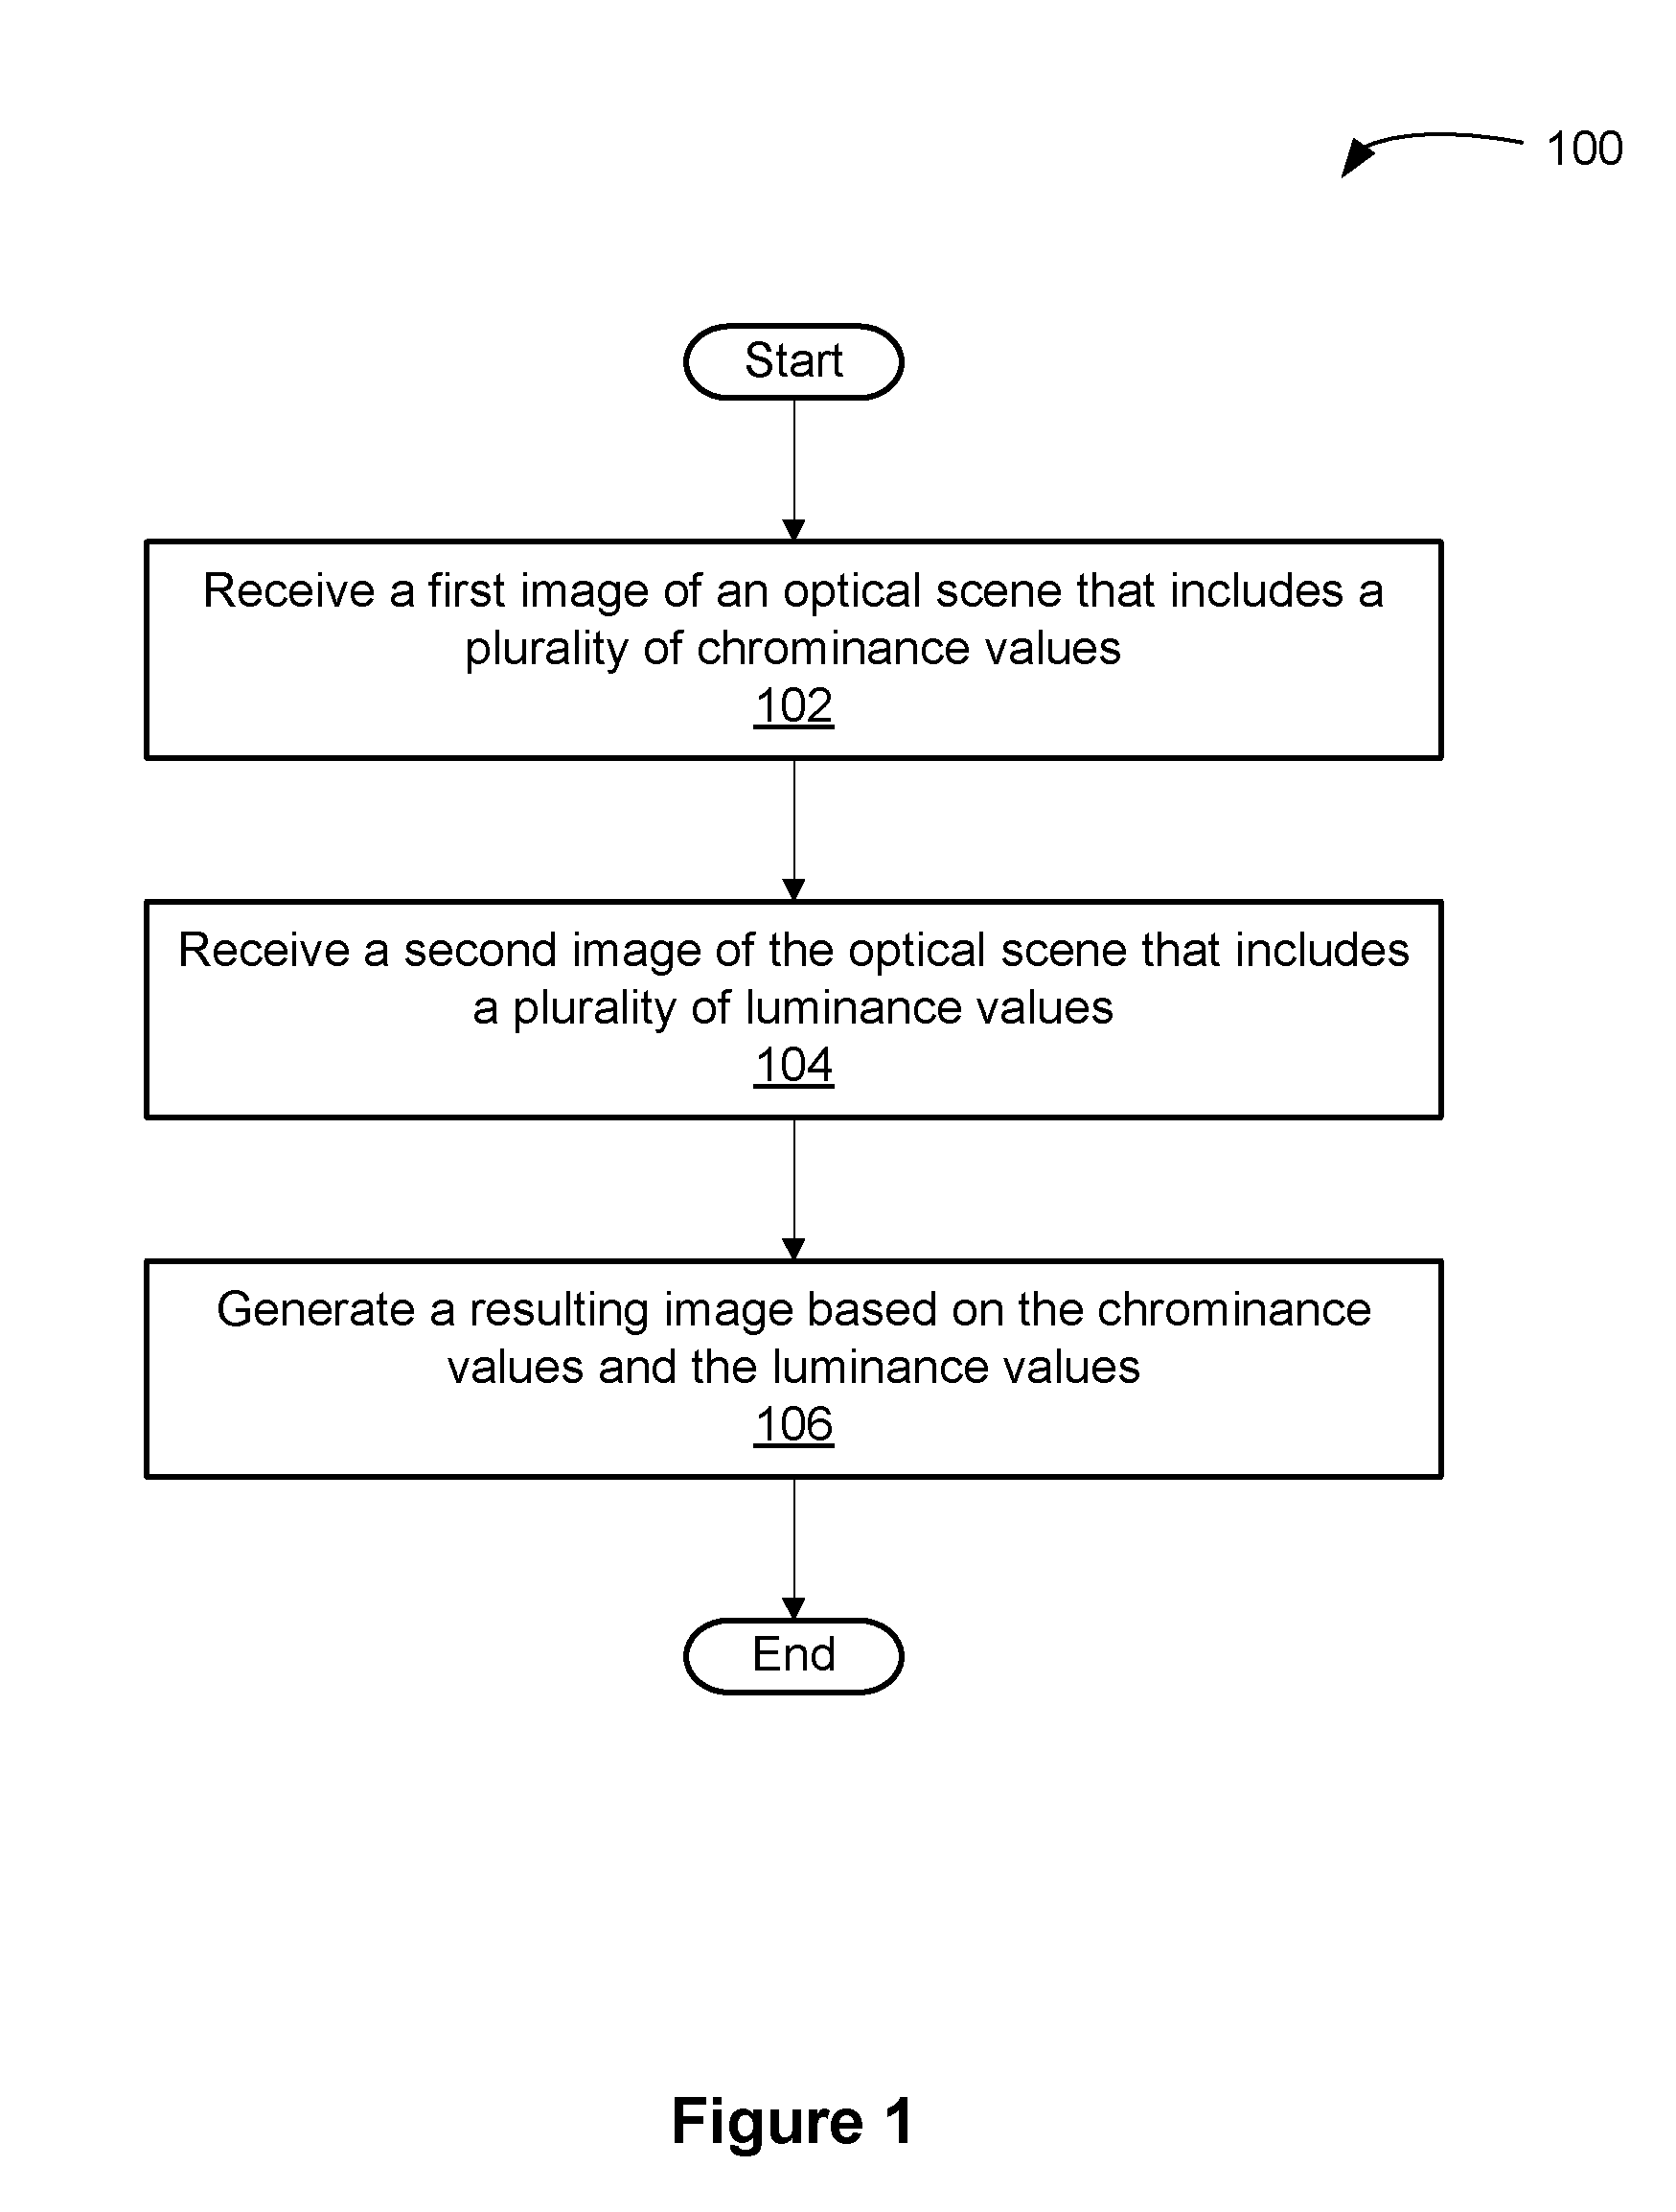 Systems and methods for generating a digital image